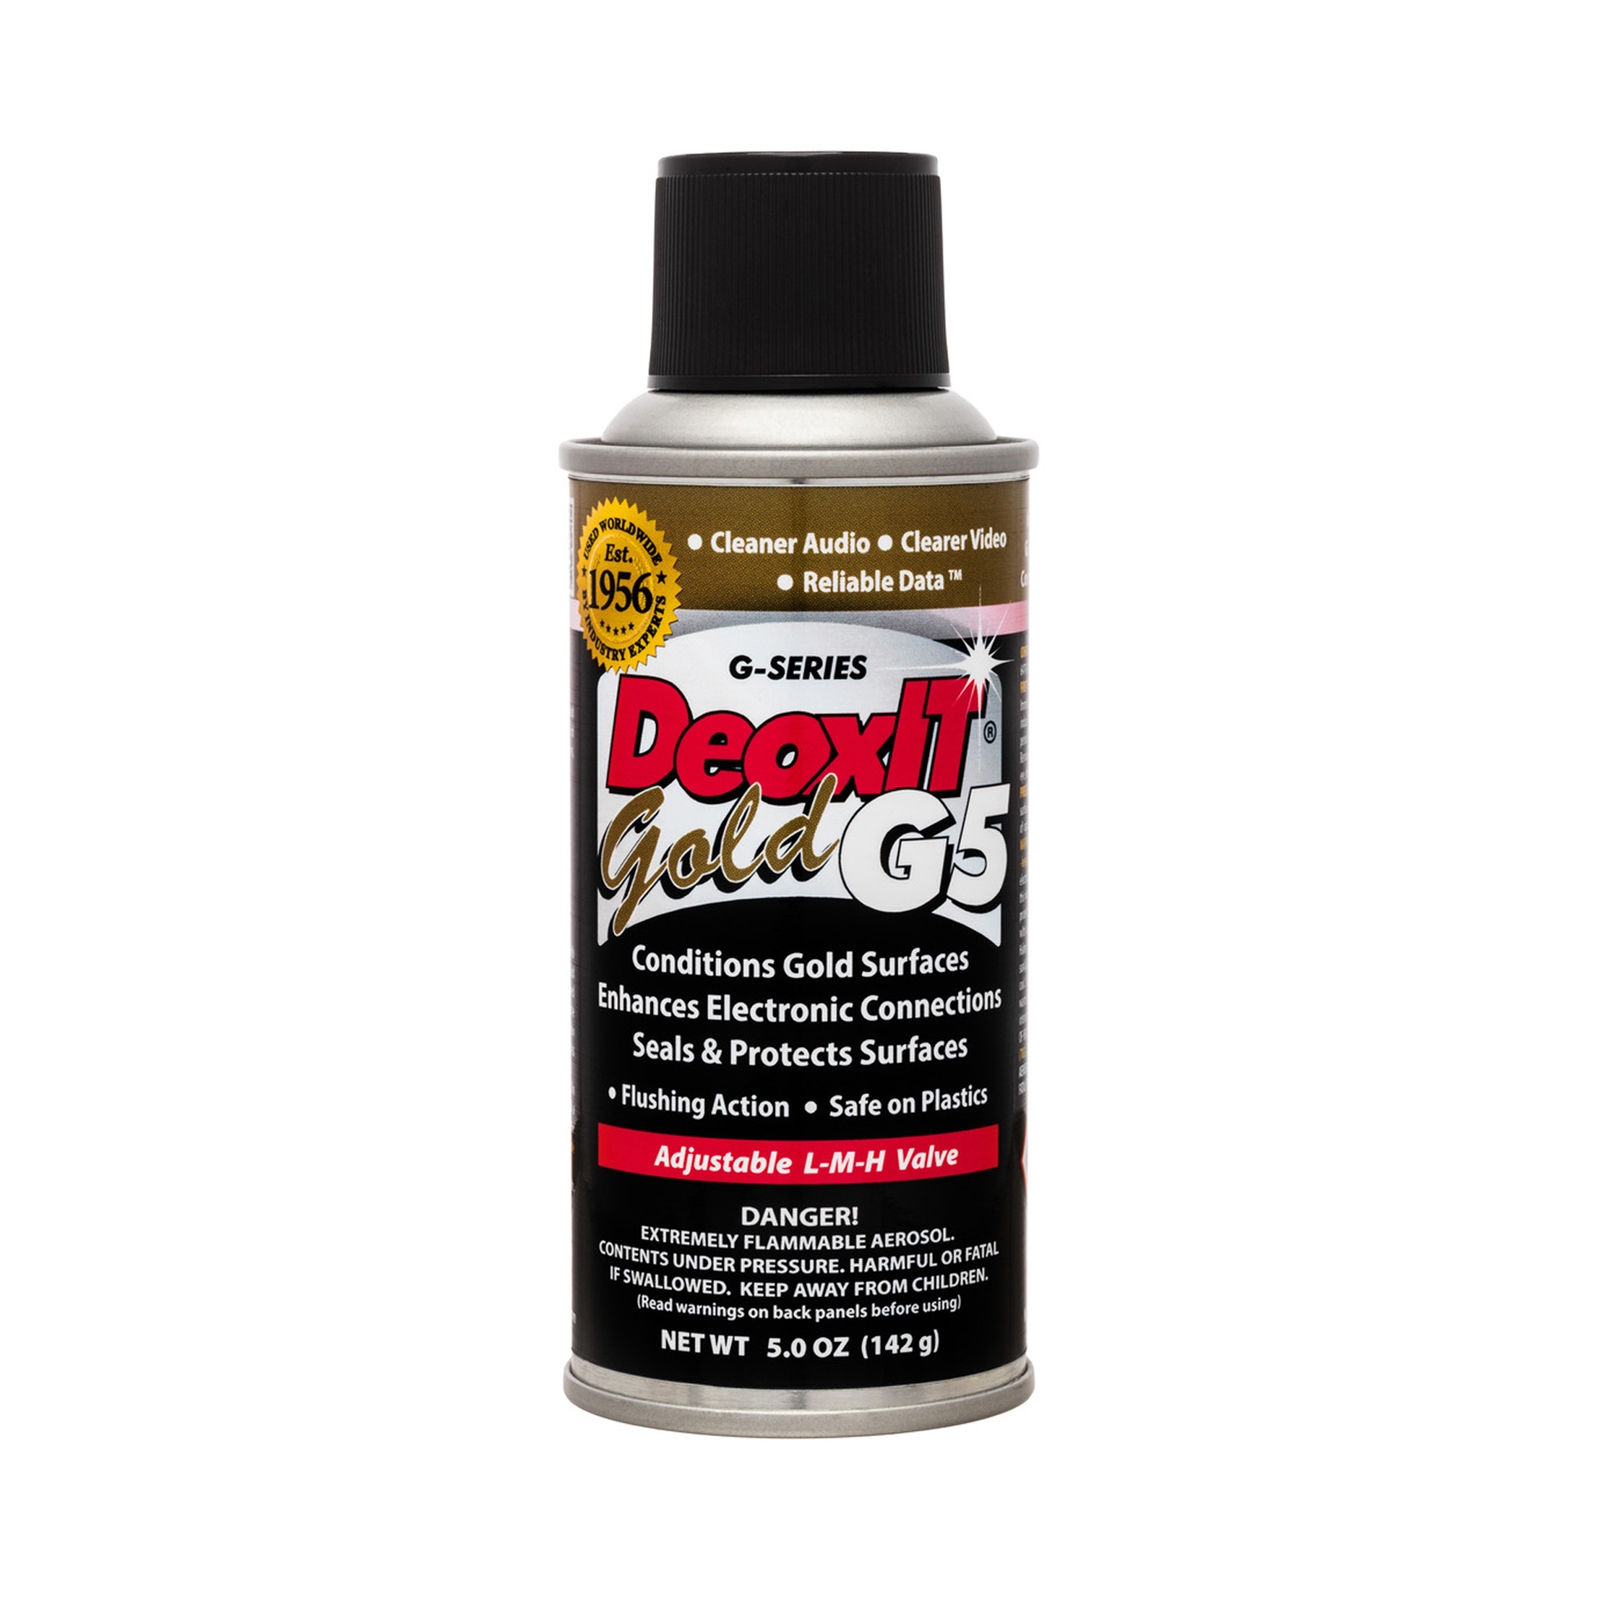 CAIG DeoxIT Gold G5 Contact Cleaner and Enhancer